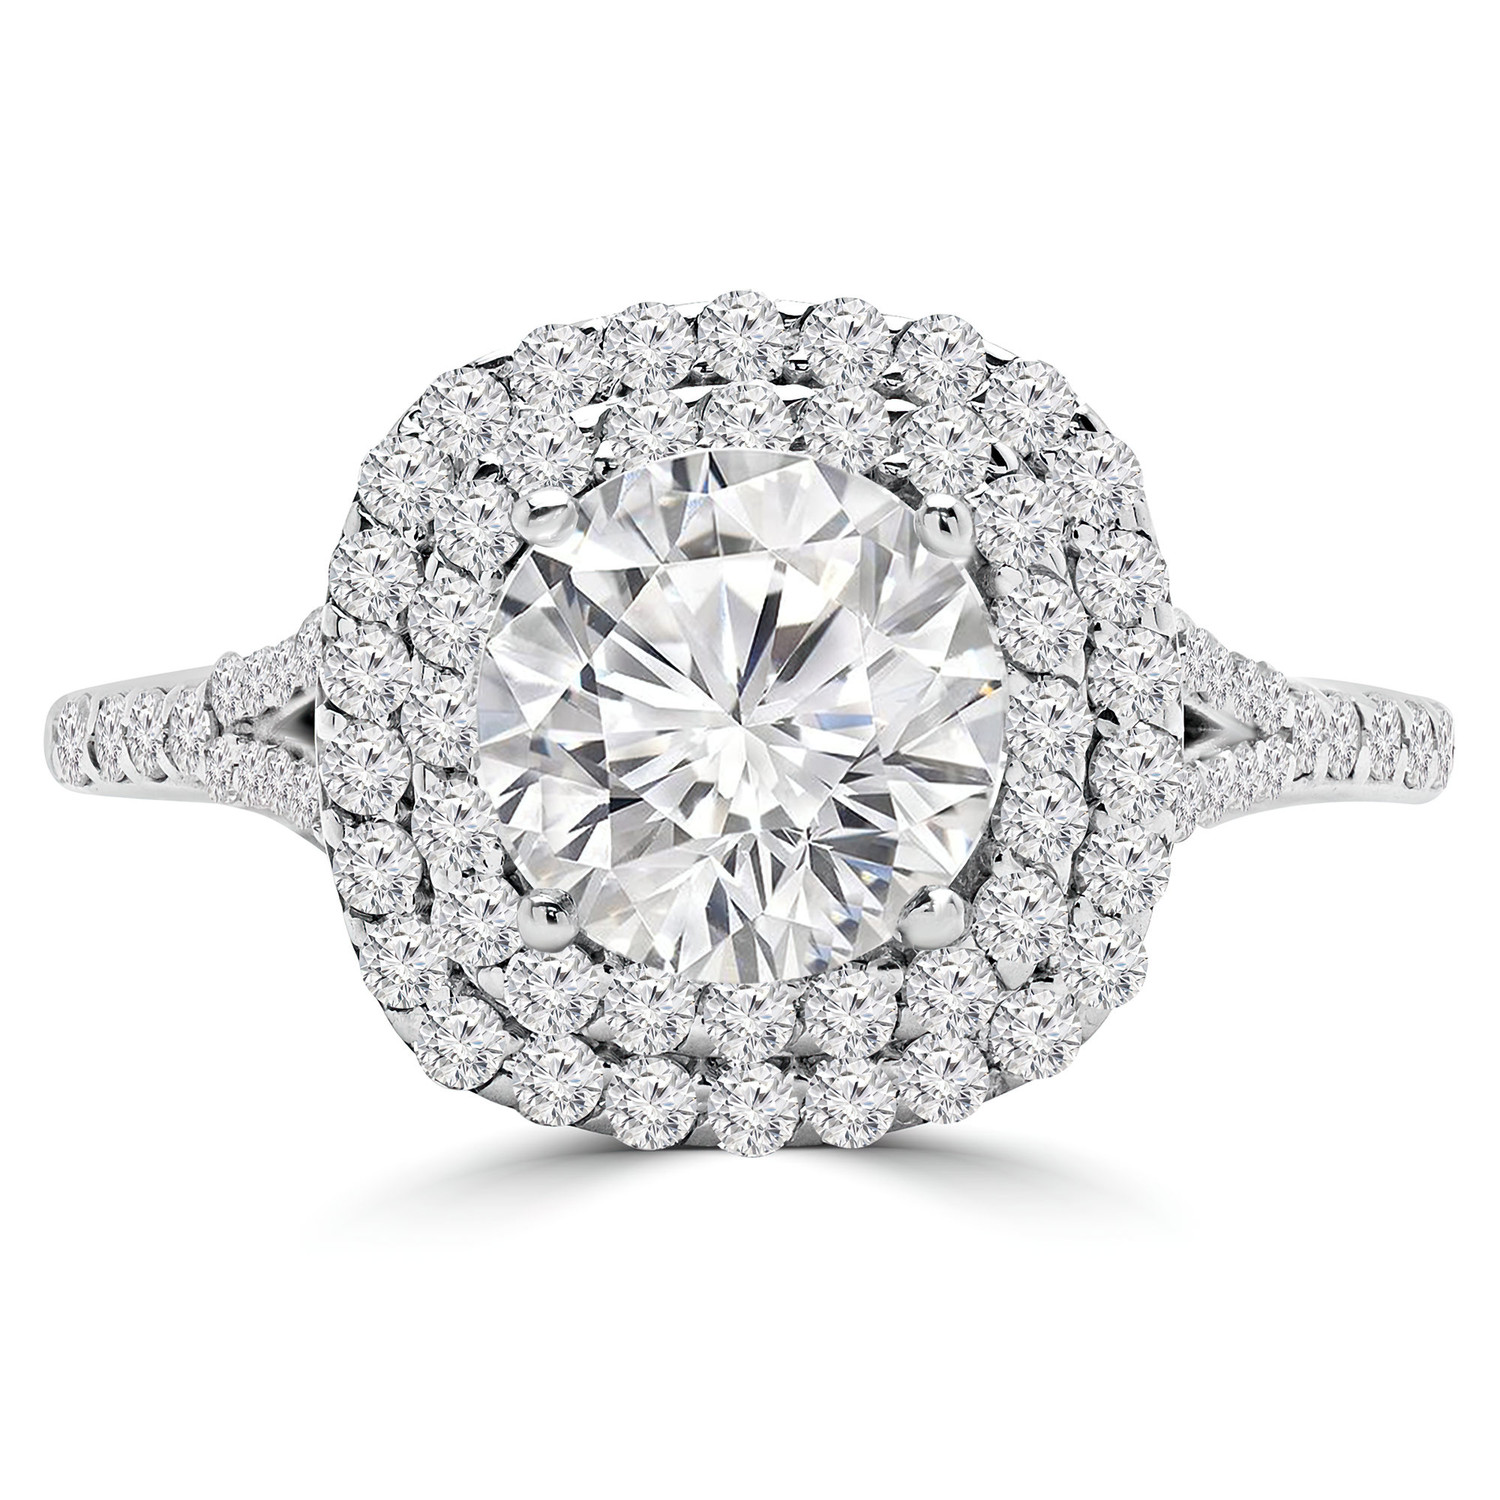 CATHEDRAL SPLIT SHANK DIAMOND ENGAGEMENT RING IN PLATINUM - Mouradian  Jewelry